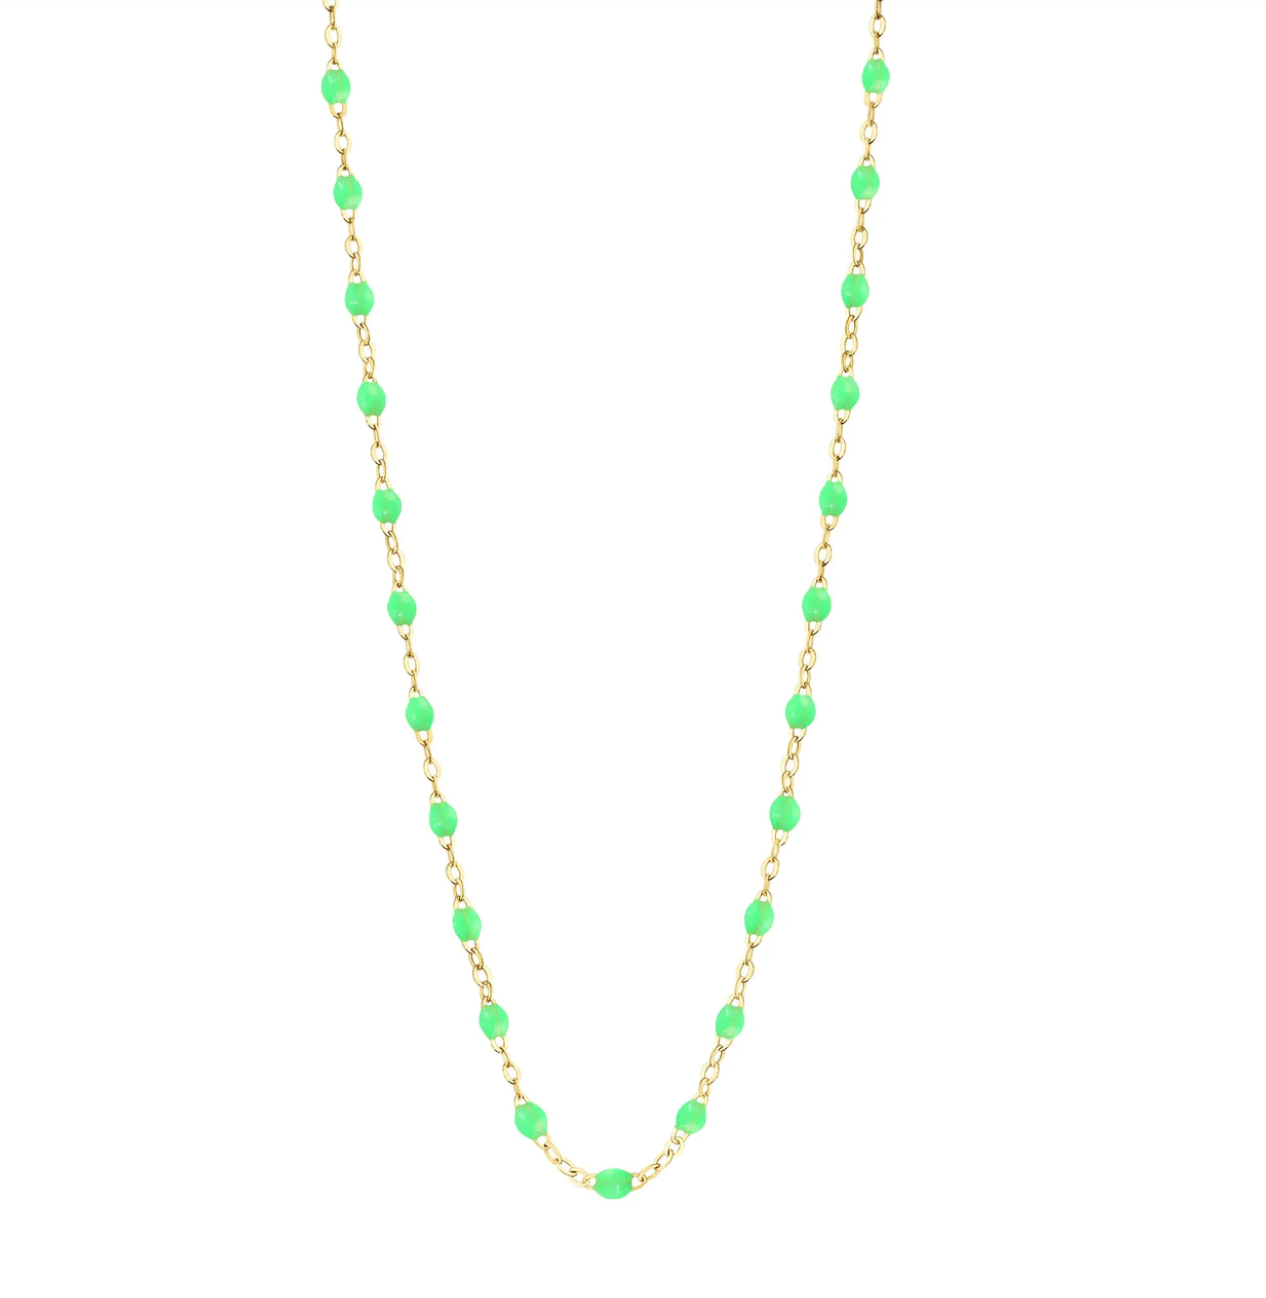 Giselle Necklace - Neon Lime